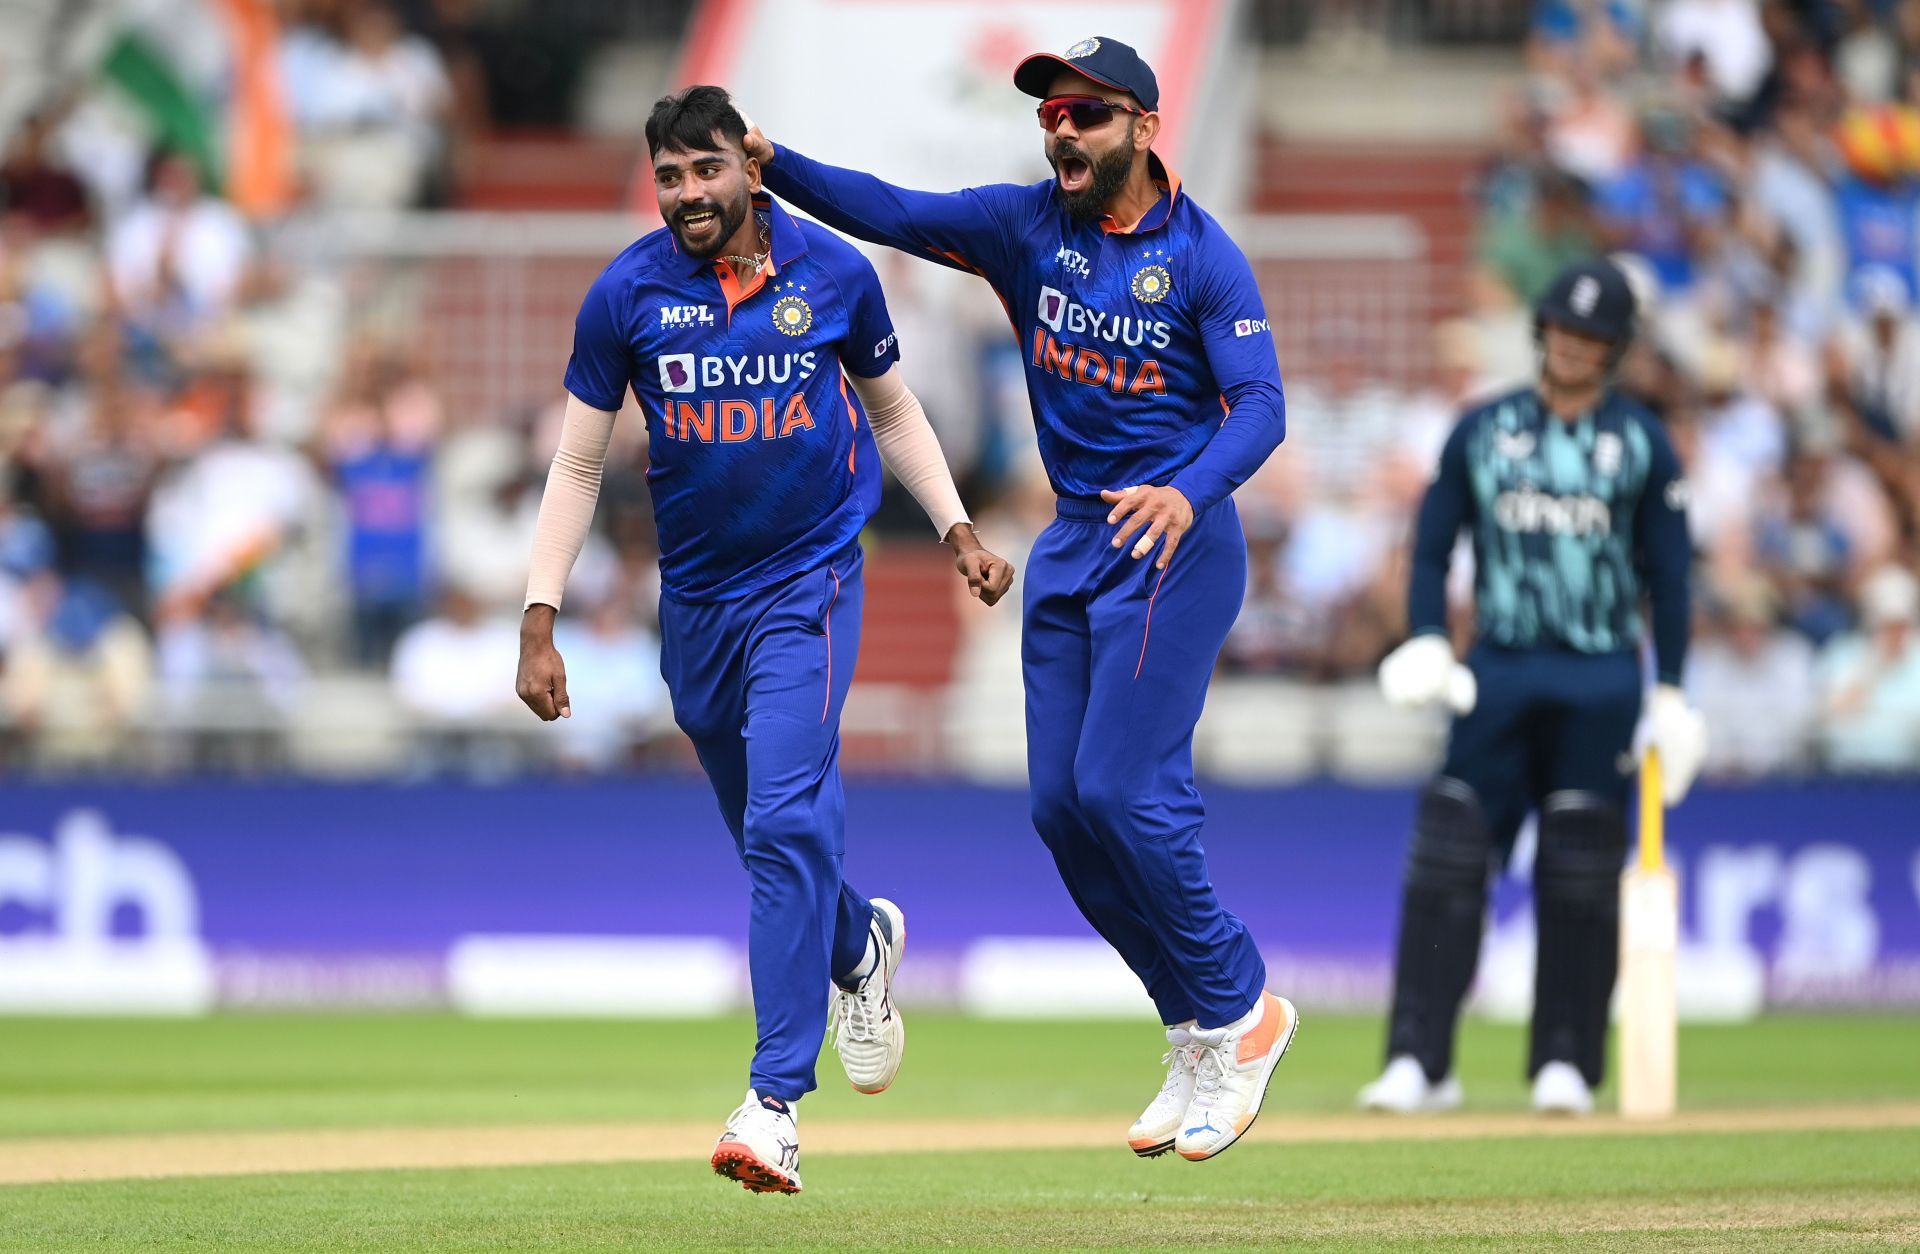 Mohammed Siraj recently played for India during their tour of England. (Image: Getty)